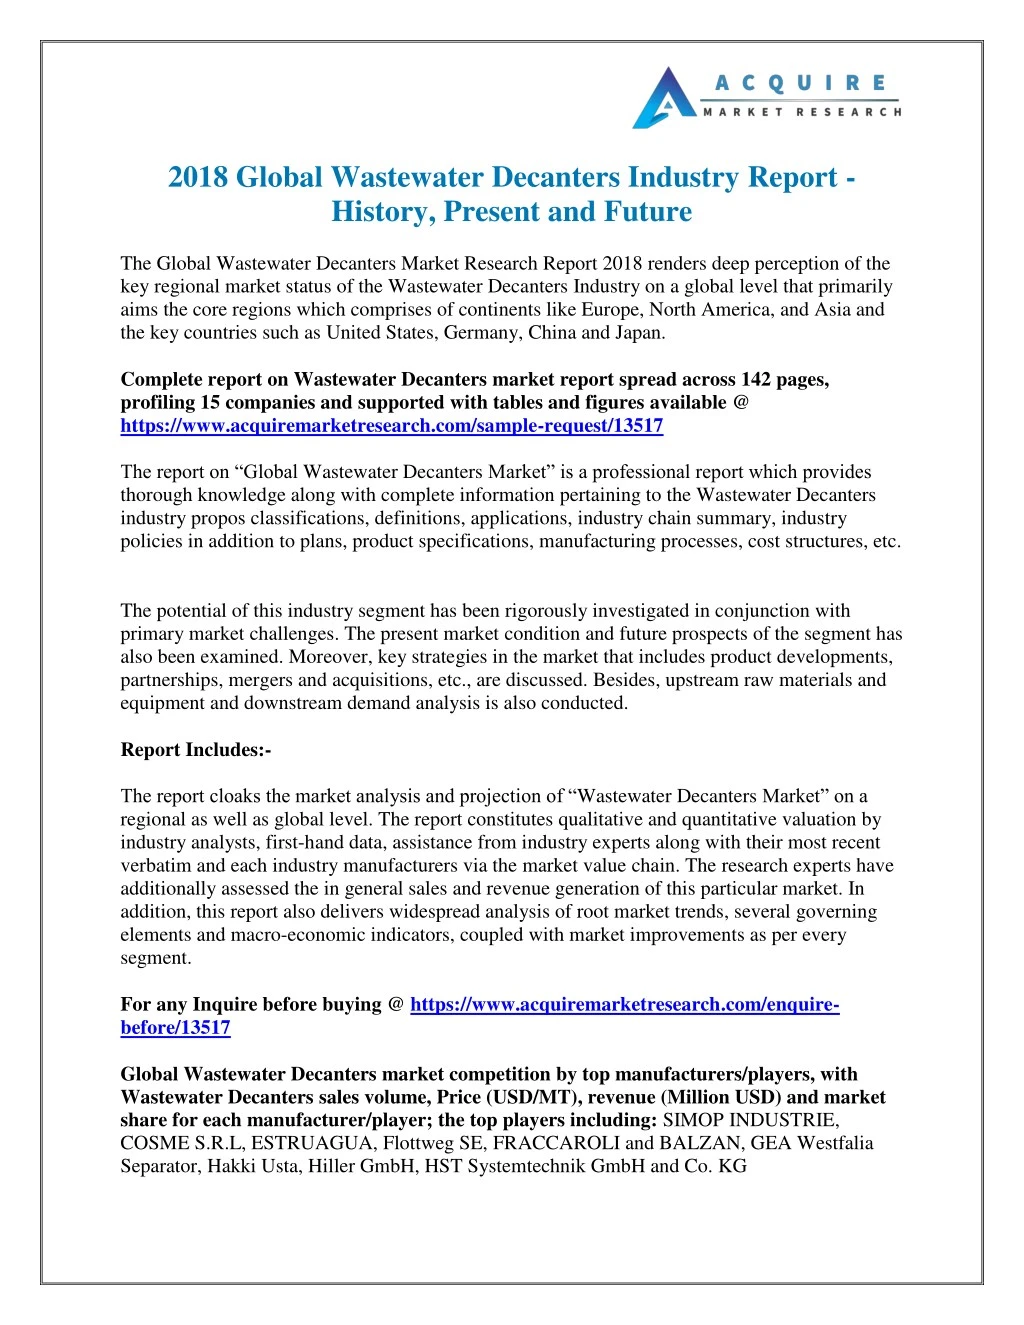 2018 global wastewater decanters industry report